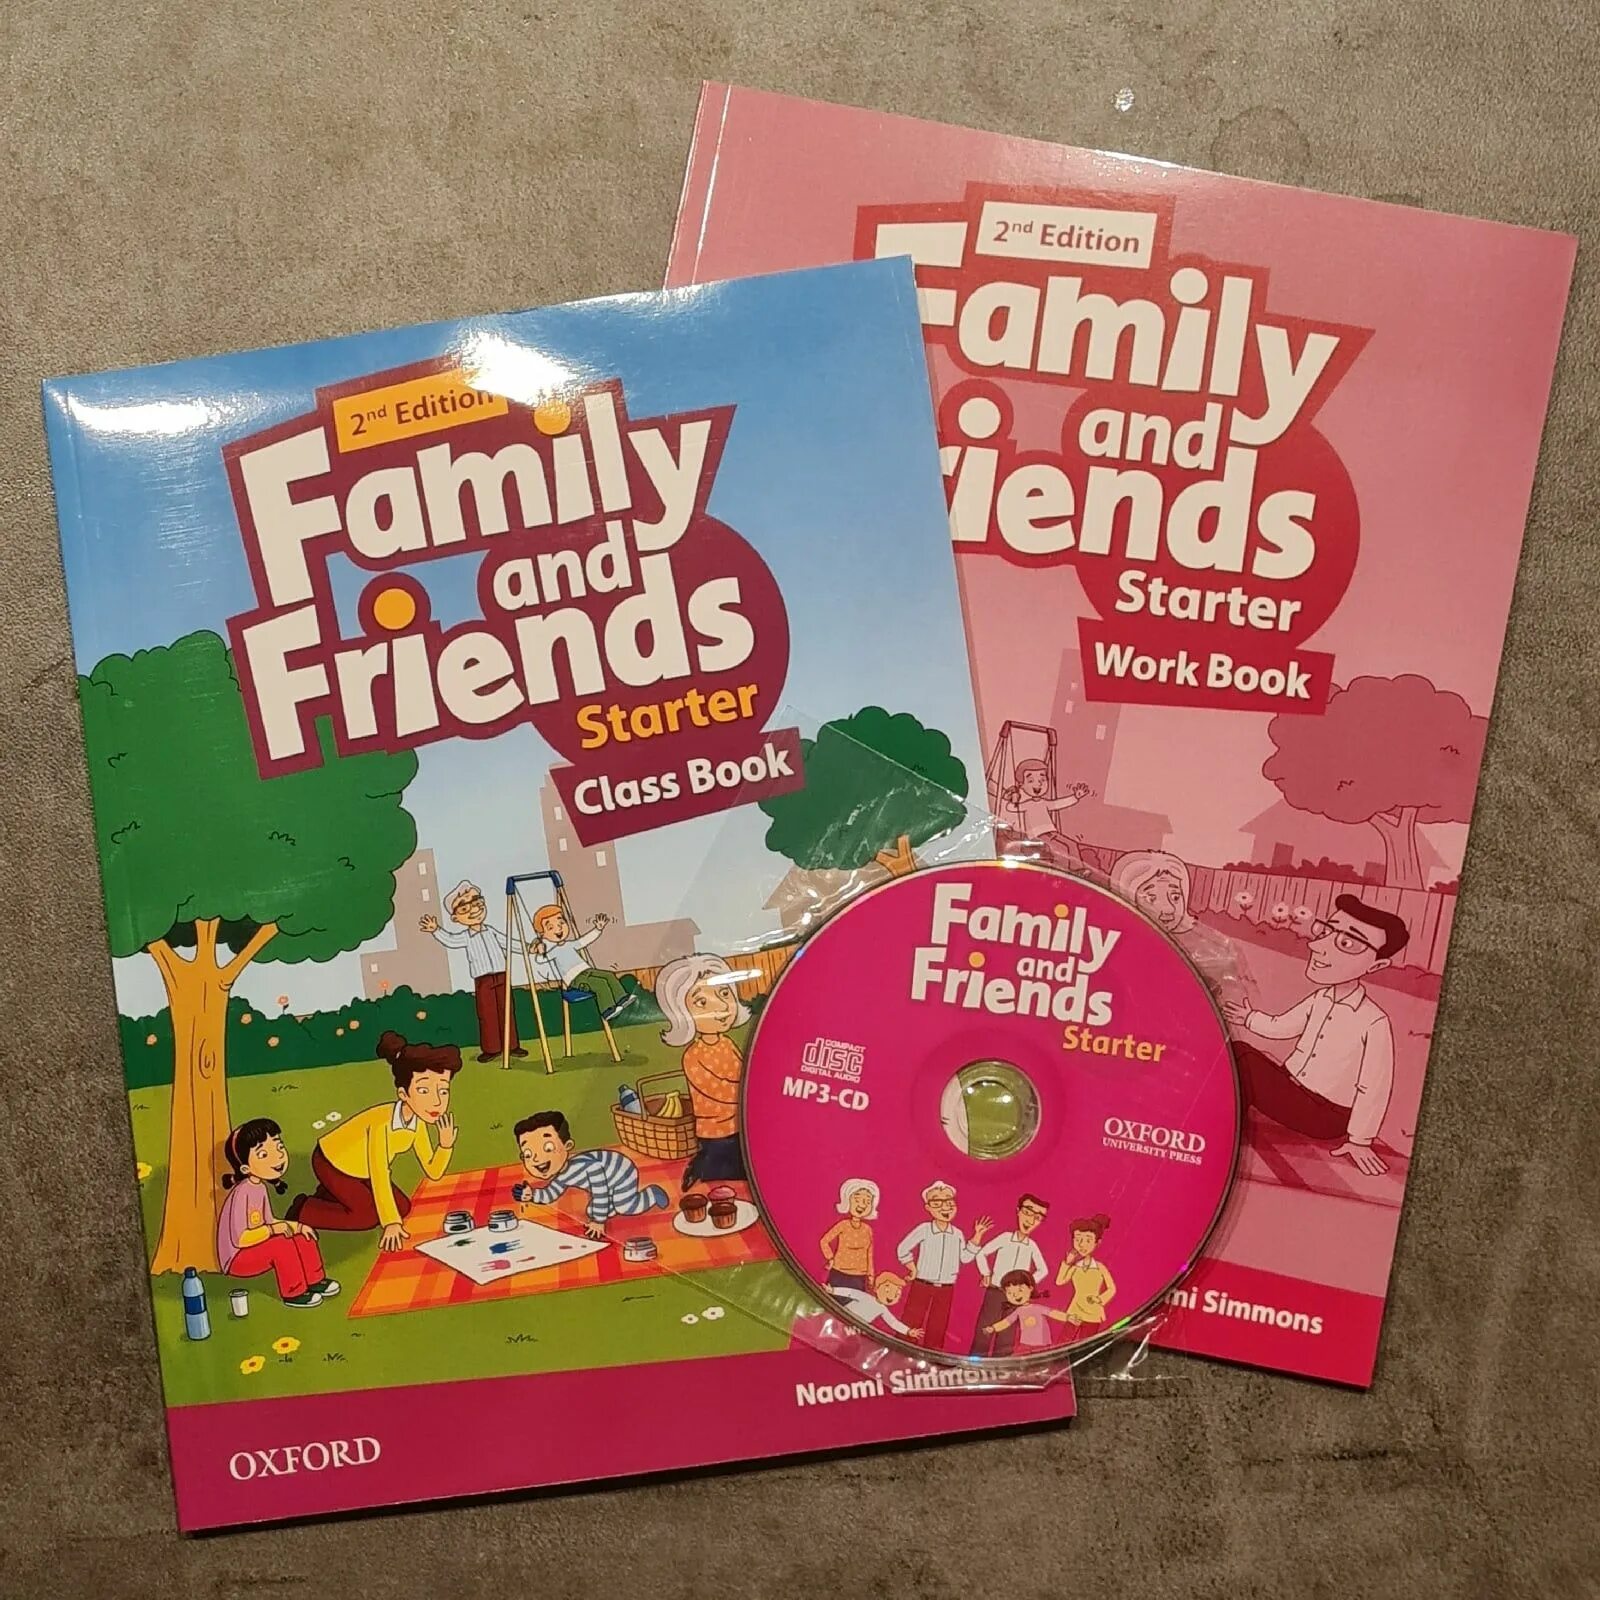 Family and friends starter book. Family and friends Starter Workbook. Family and friends Starter материалы. Family and friends 2. Family and friends Starter picture Dictionary.